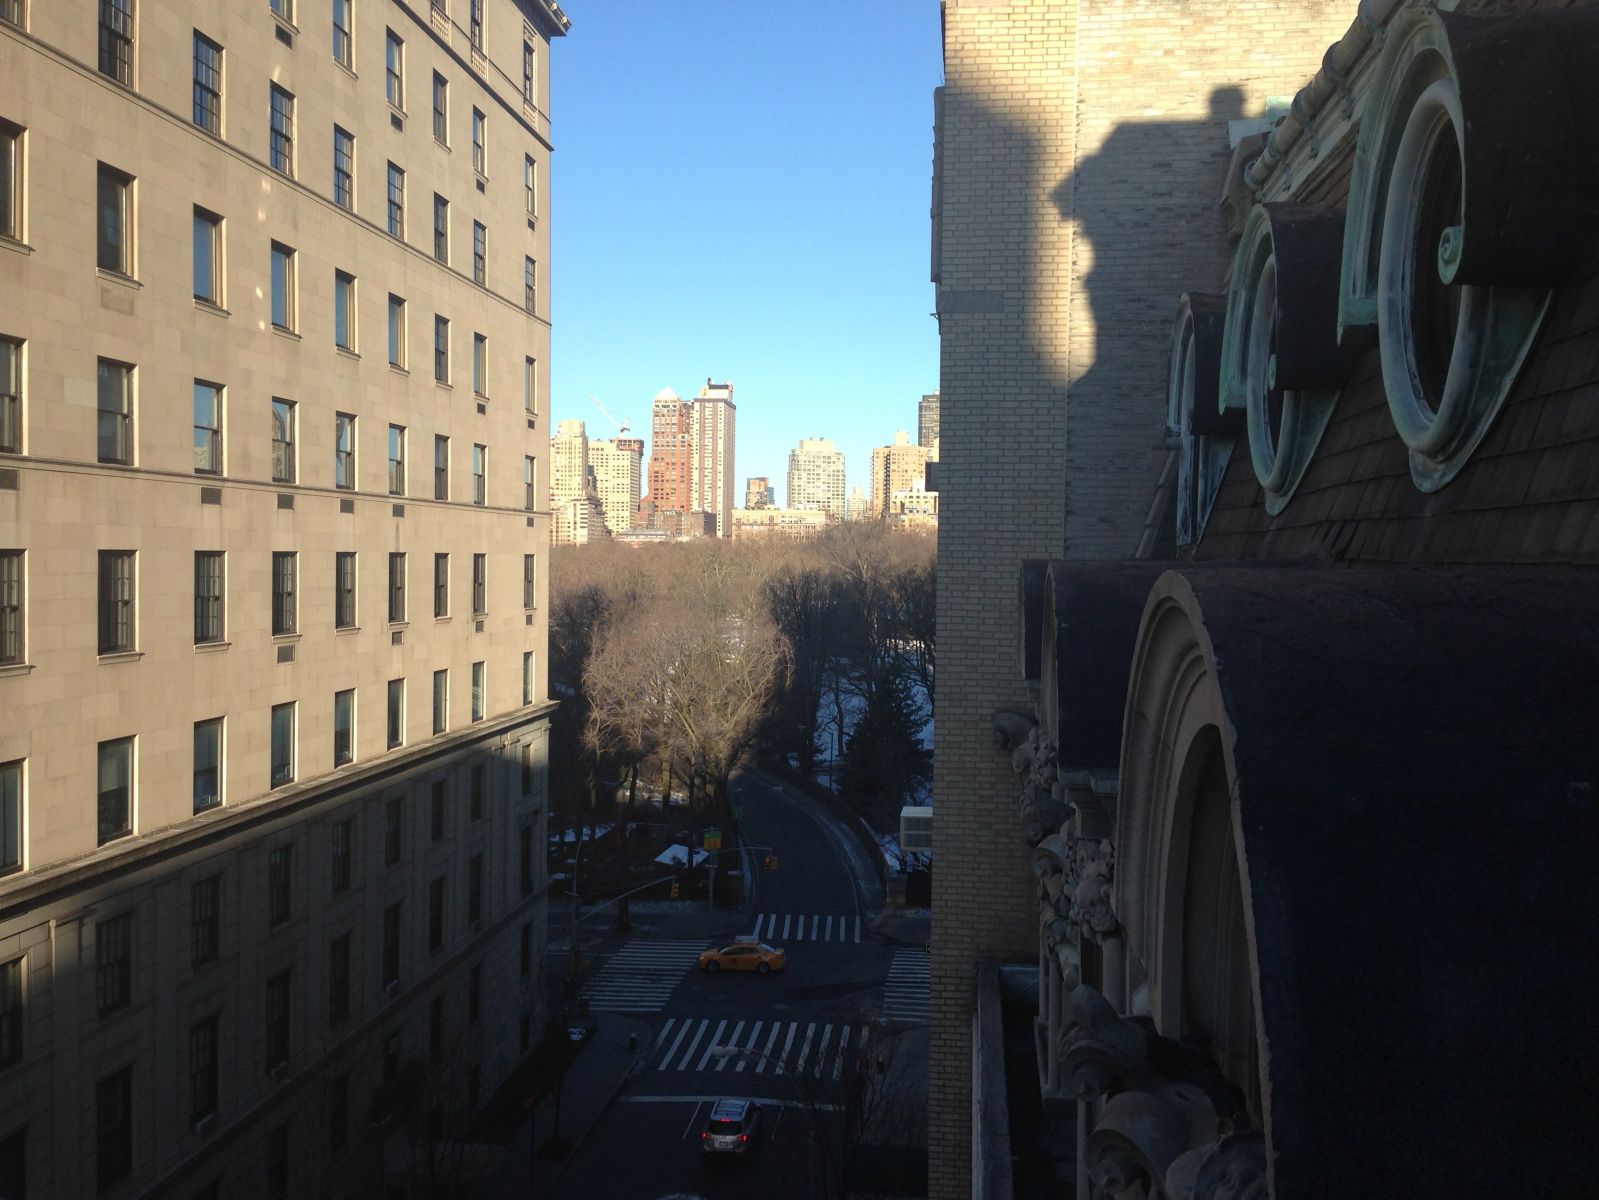 66th ST, Central Park view